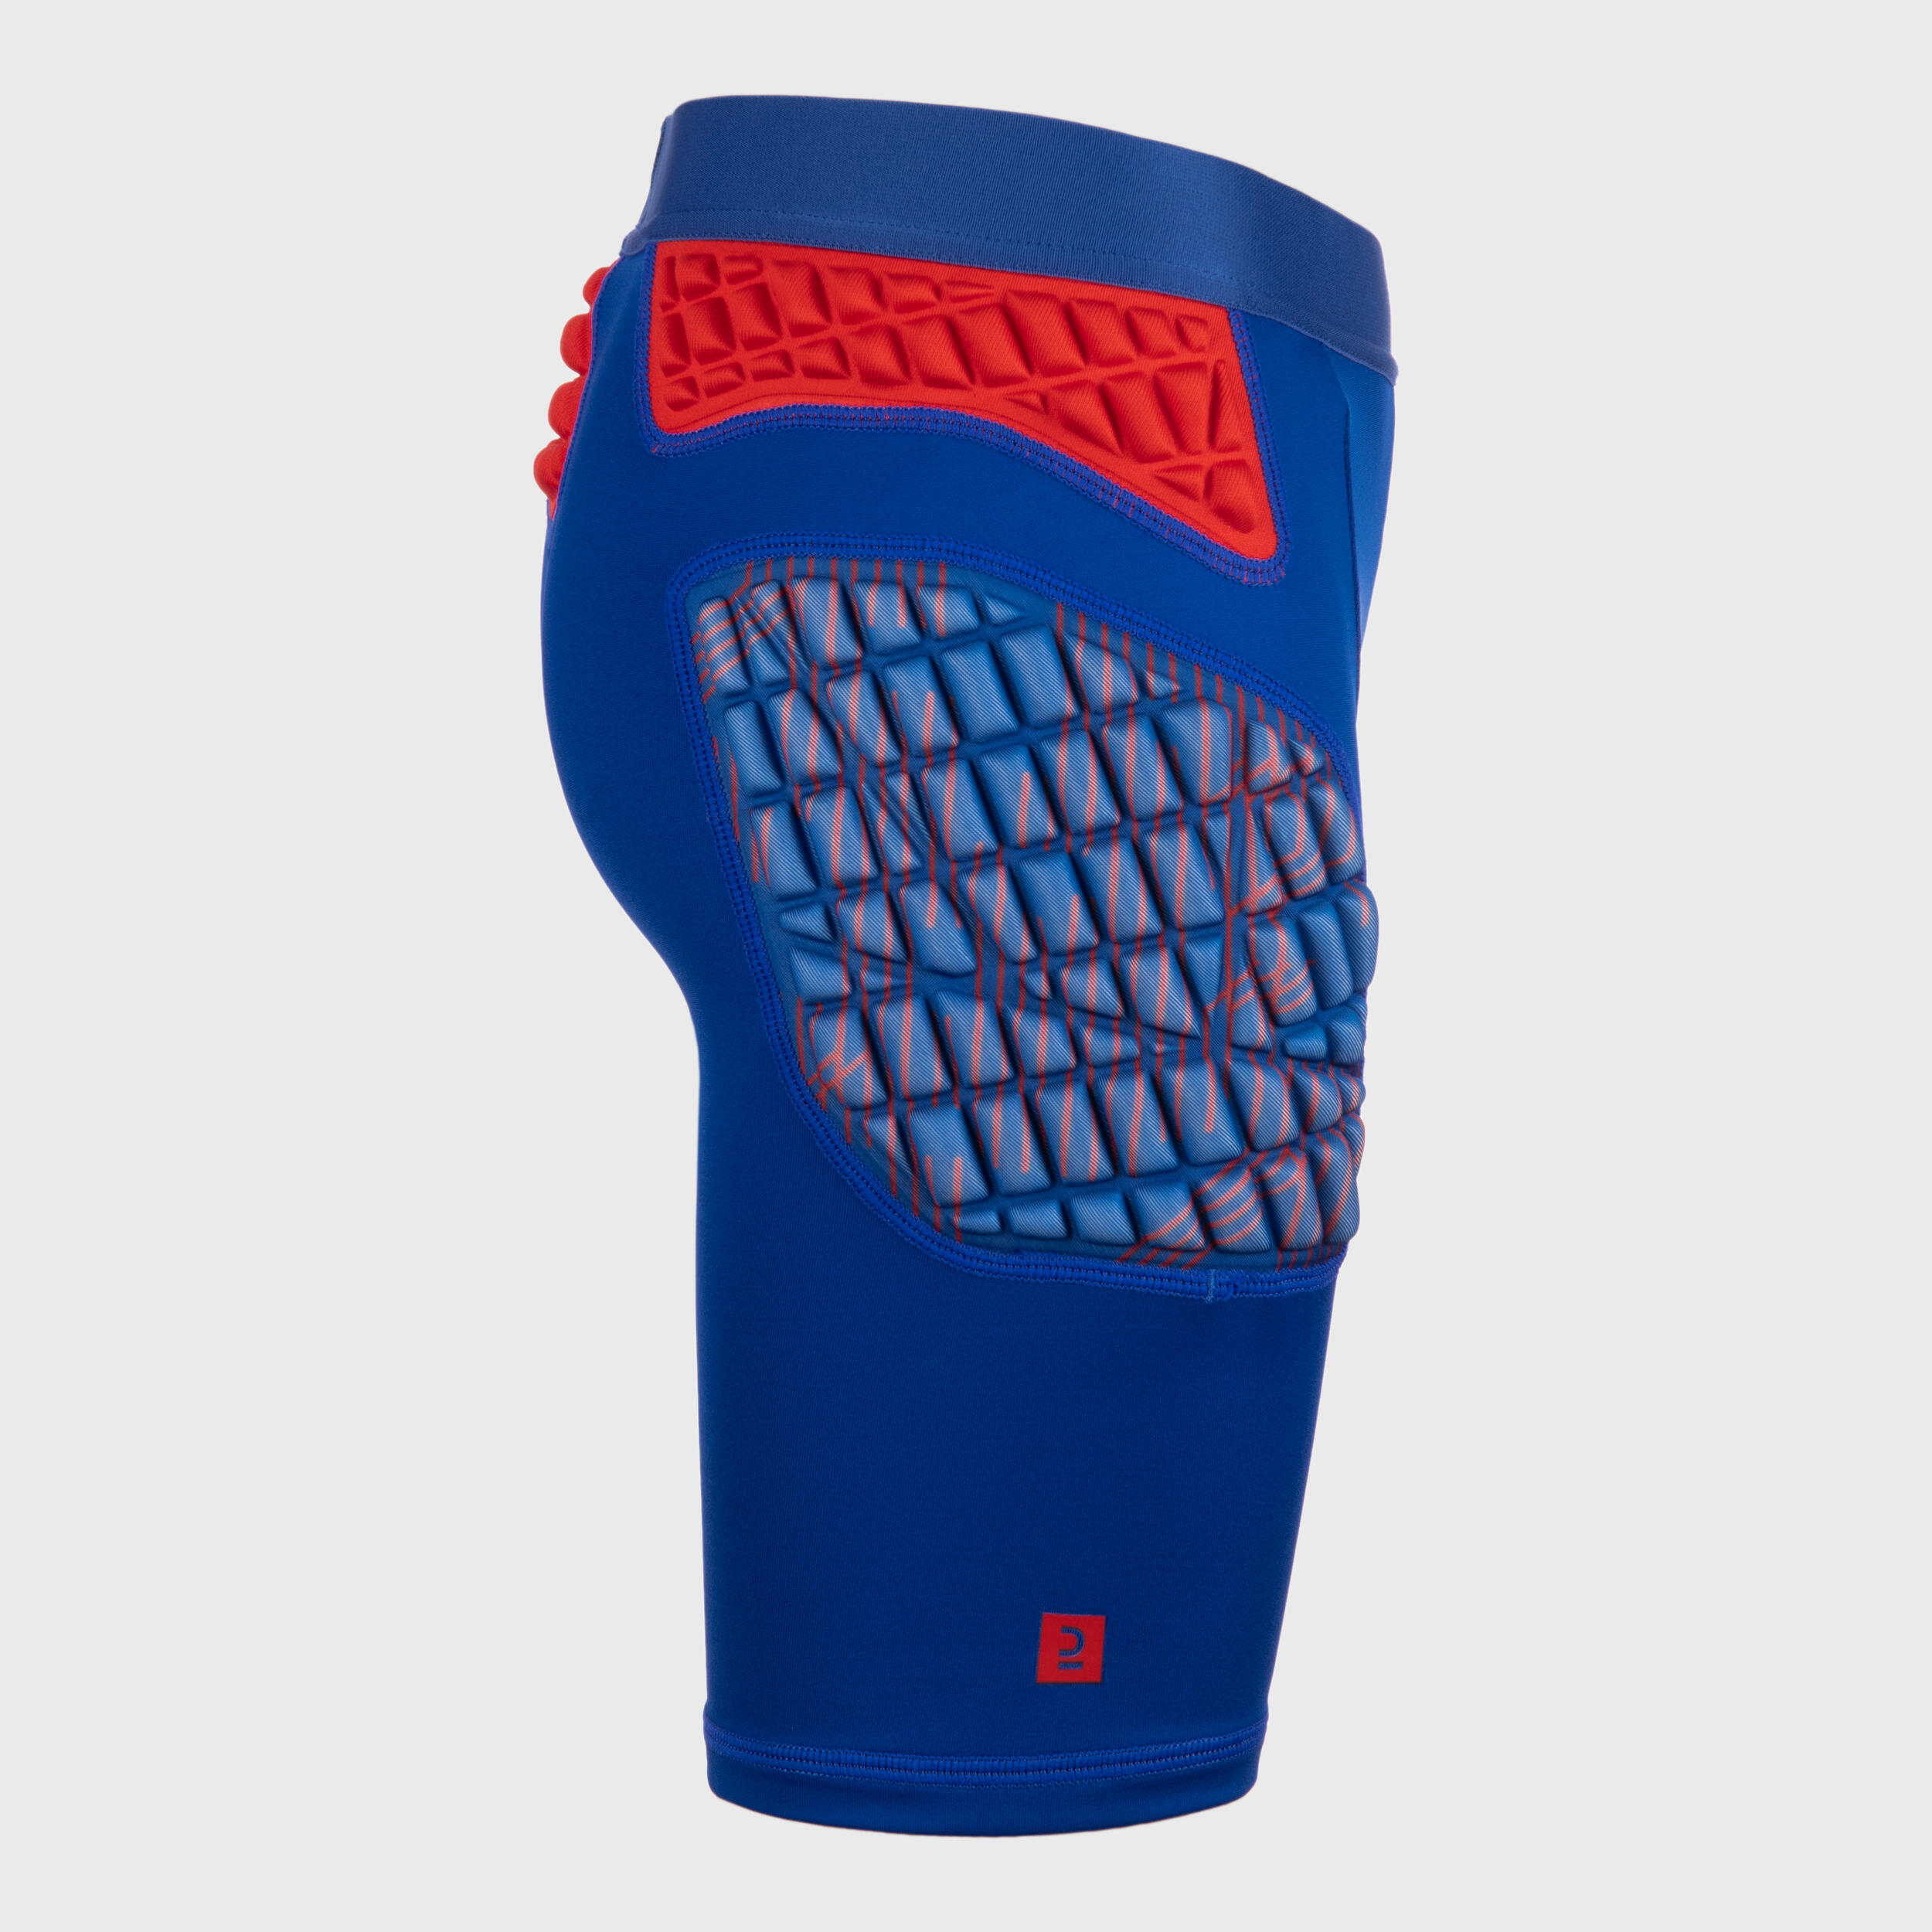 Kids' Protective Rugby Undershorts R500 - Blue/Red 3/7